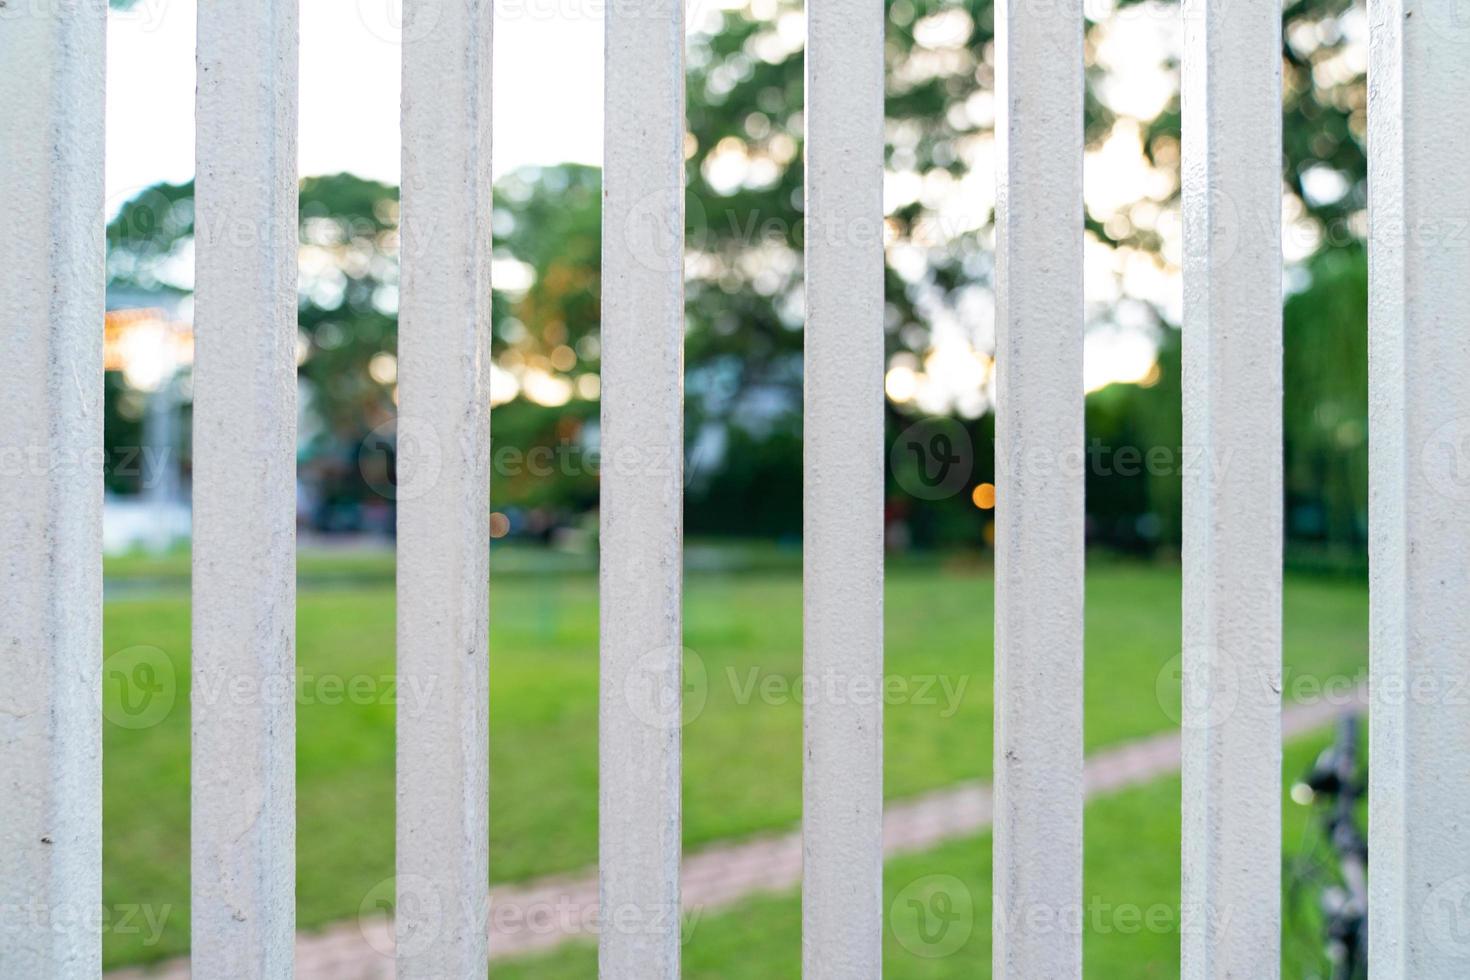 Vertical White Steel Fence Grille front of Garden. photo